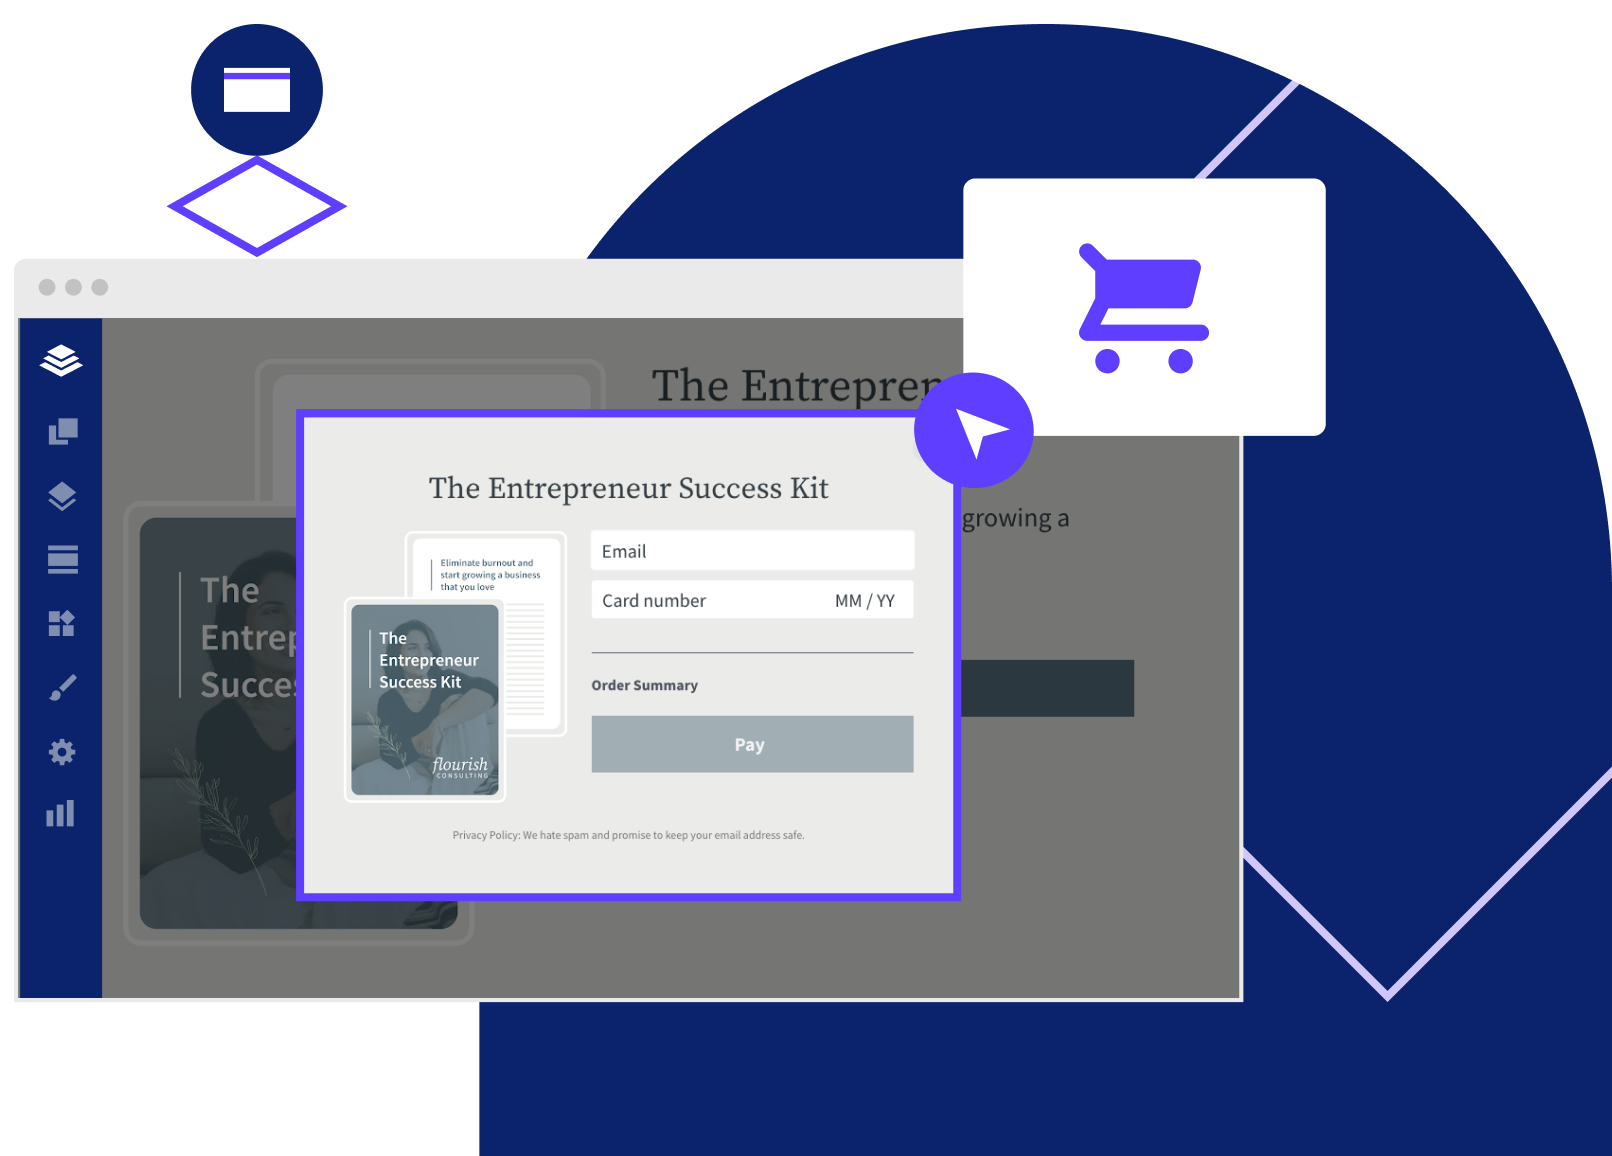 a leadpages checkout purchase form and shopping cart tool for selling a success kit online